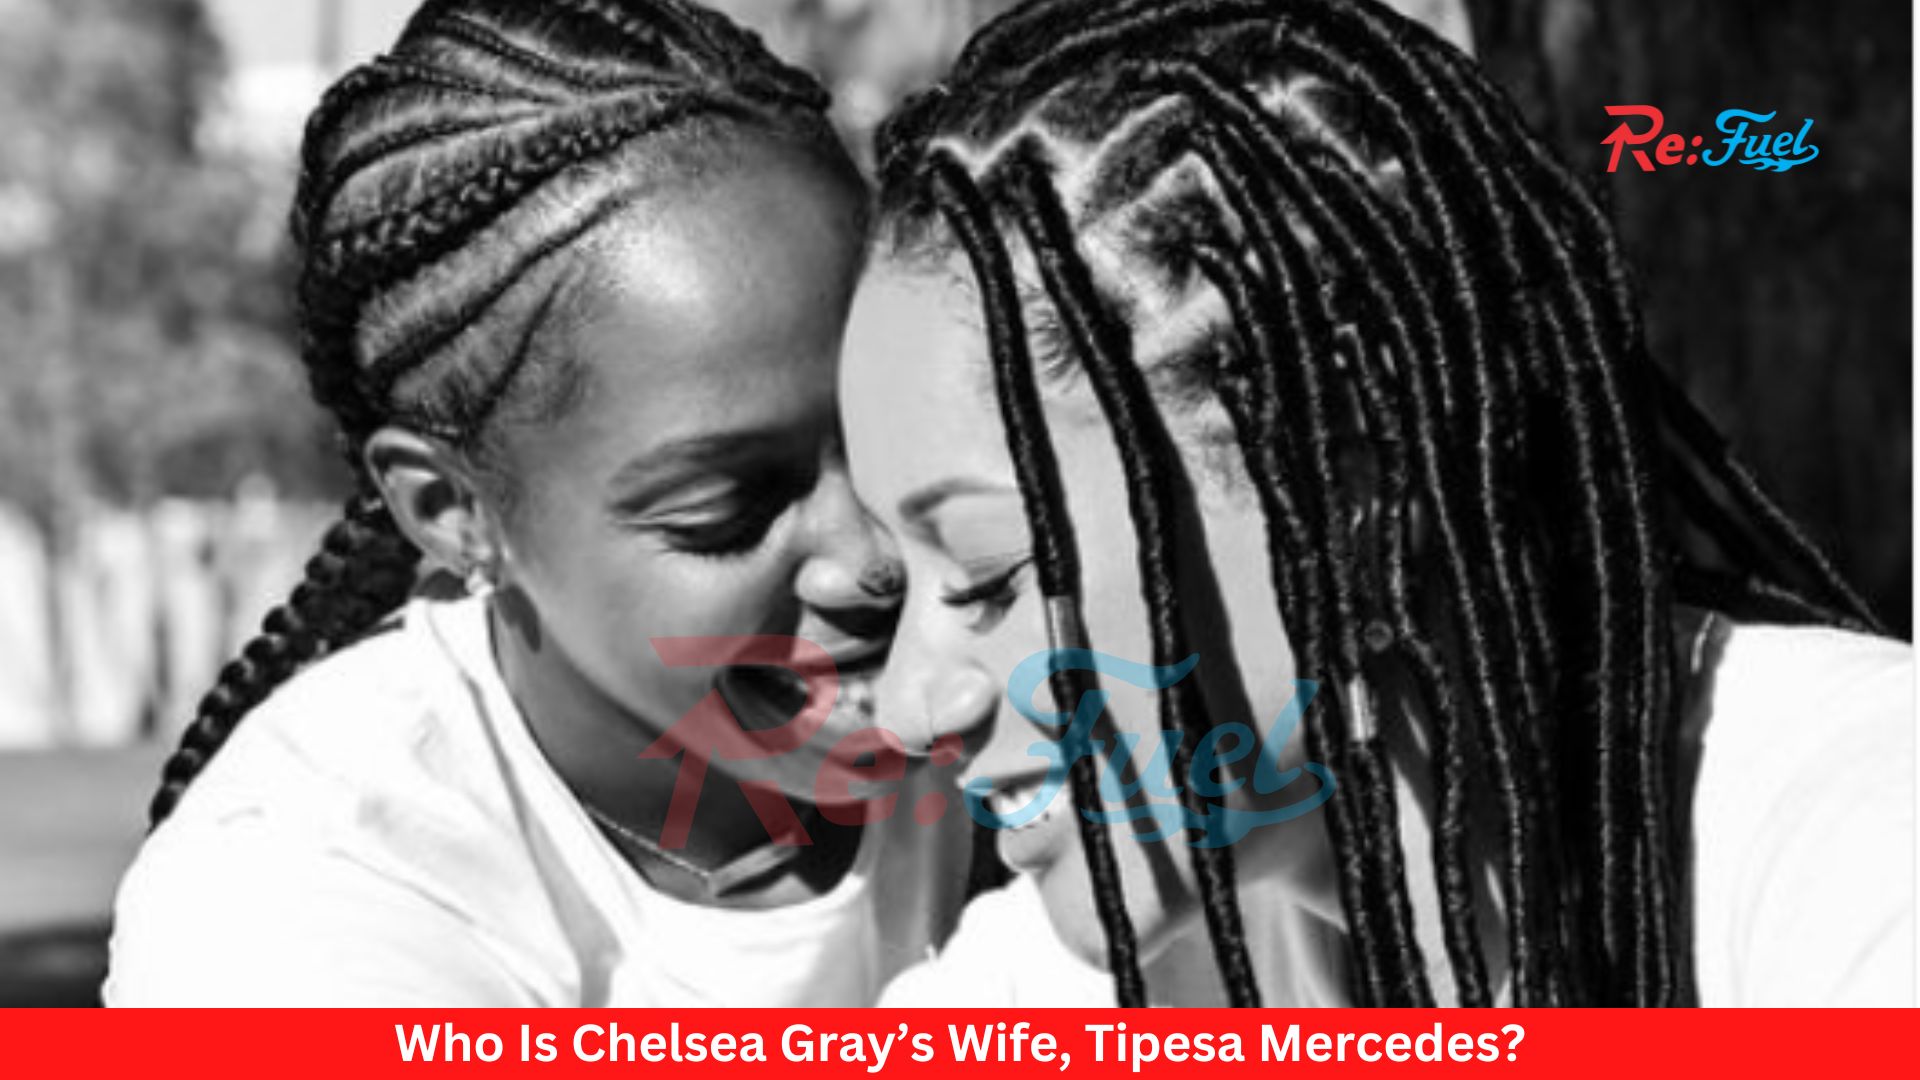 Who Is Chelsea Gray’s Wife, Tipesa Mercedes?